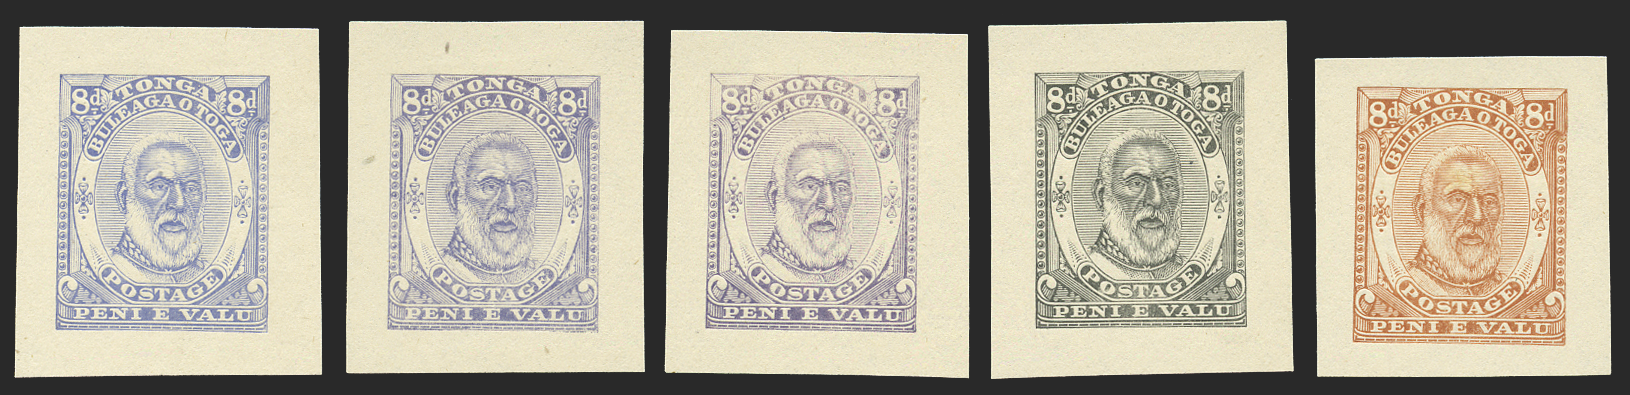 Tonga 1892 8d die proofs x 5 in unissued colours, SG13